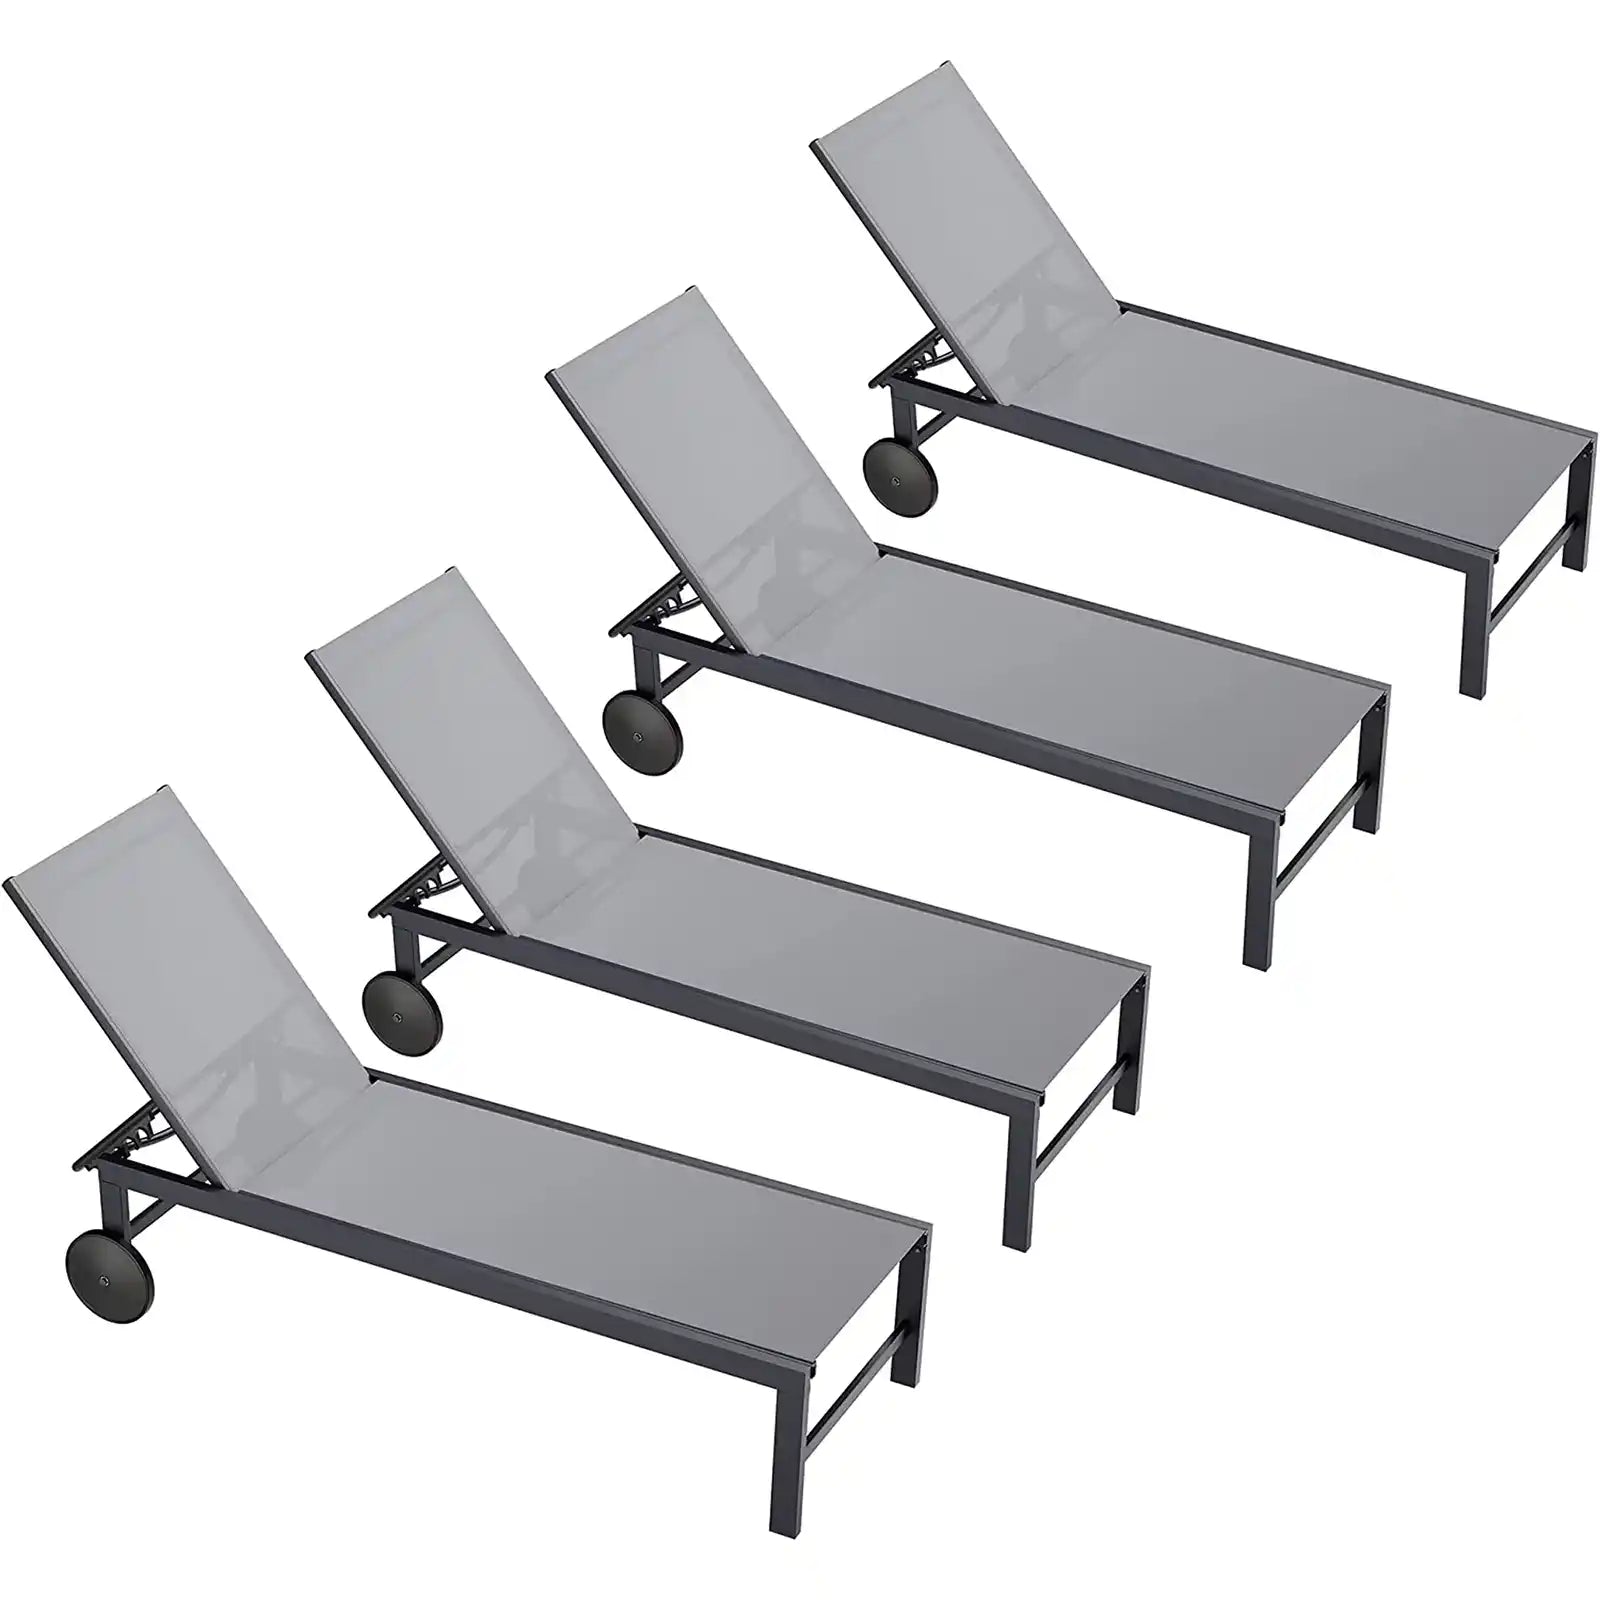 Patio Outdoor Chaise Lounge Chair with Wheels for Outside Aluminum Adjustable Angle Lounge Chair Set